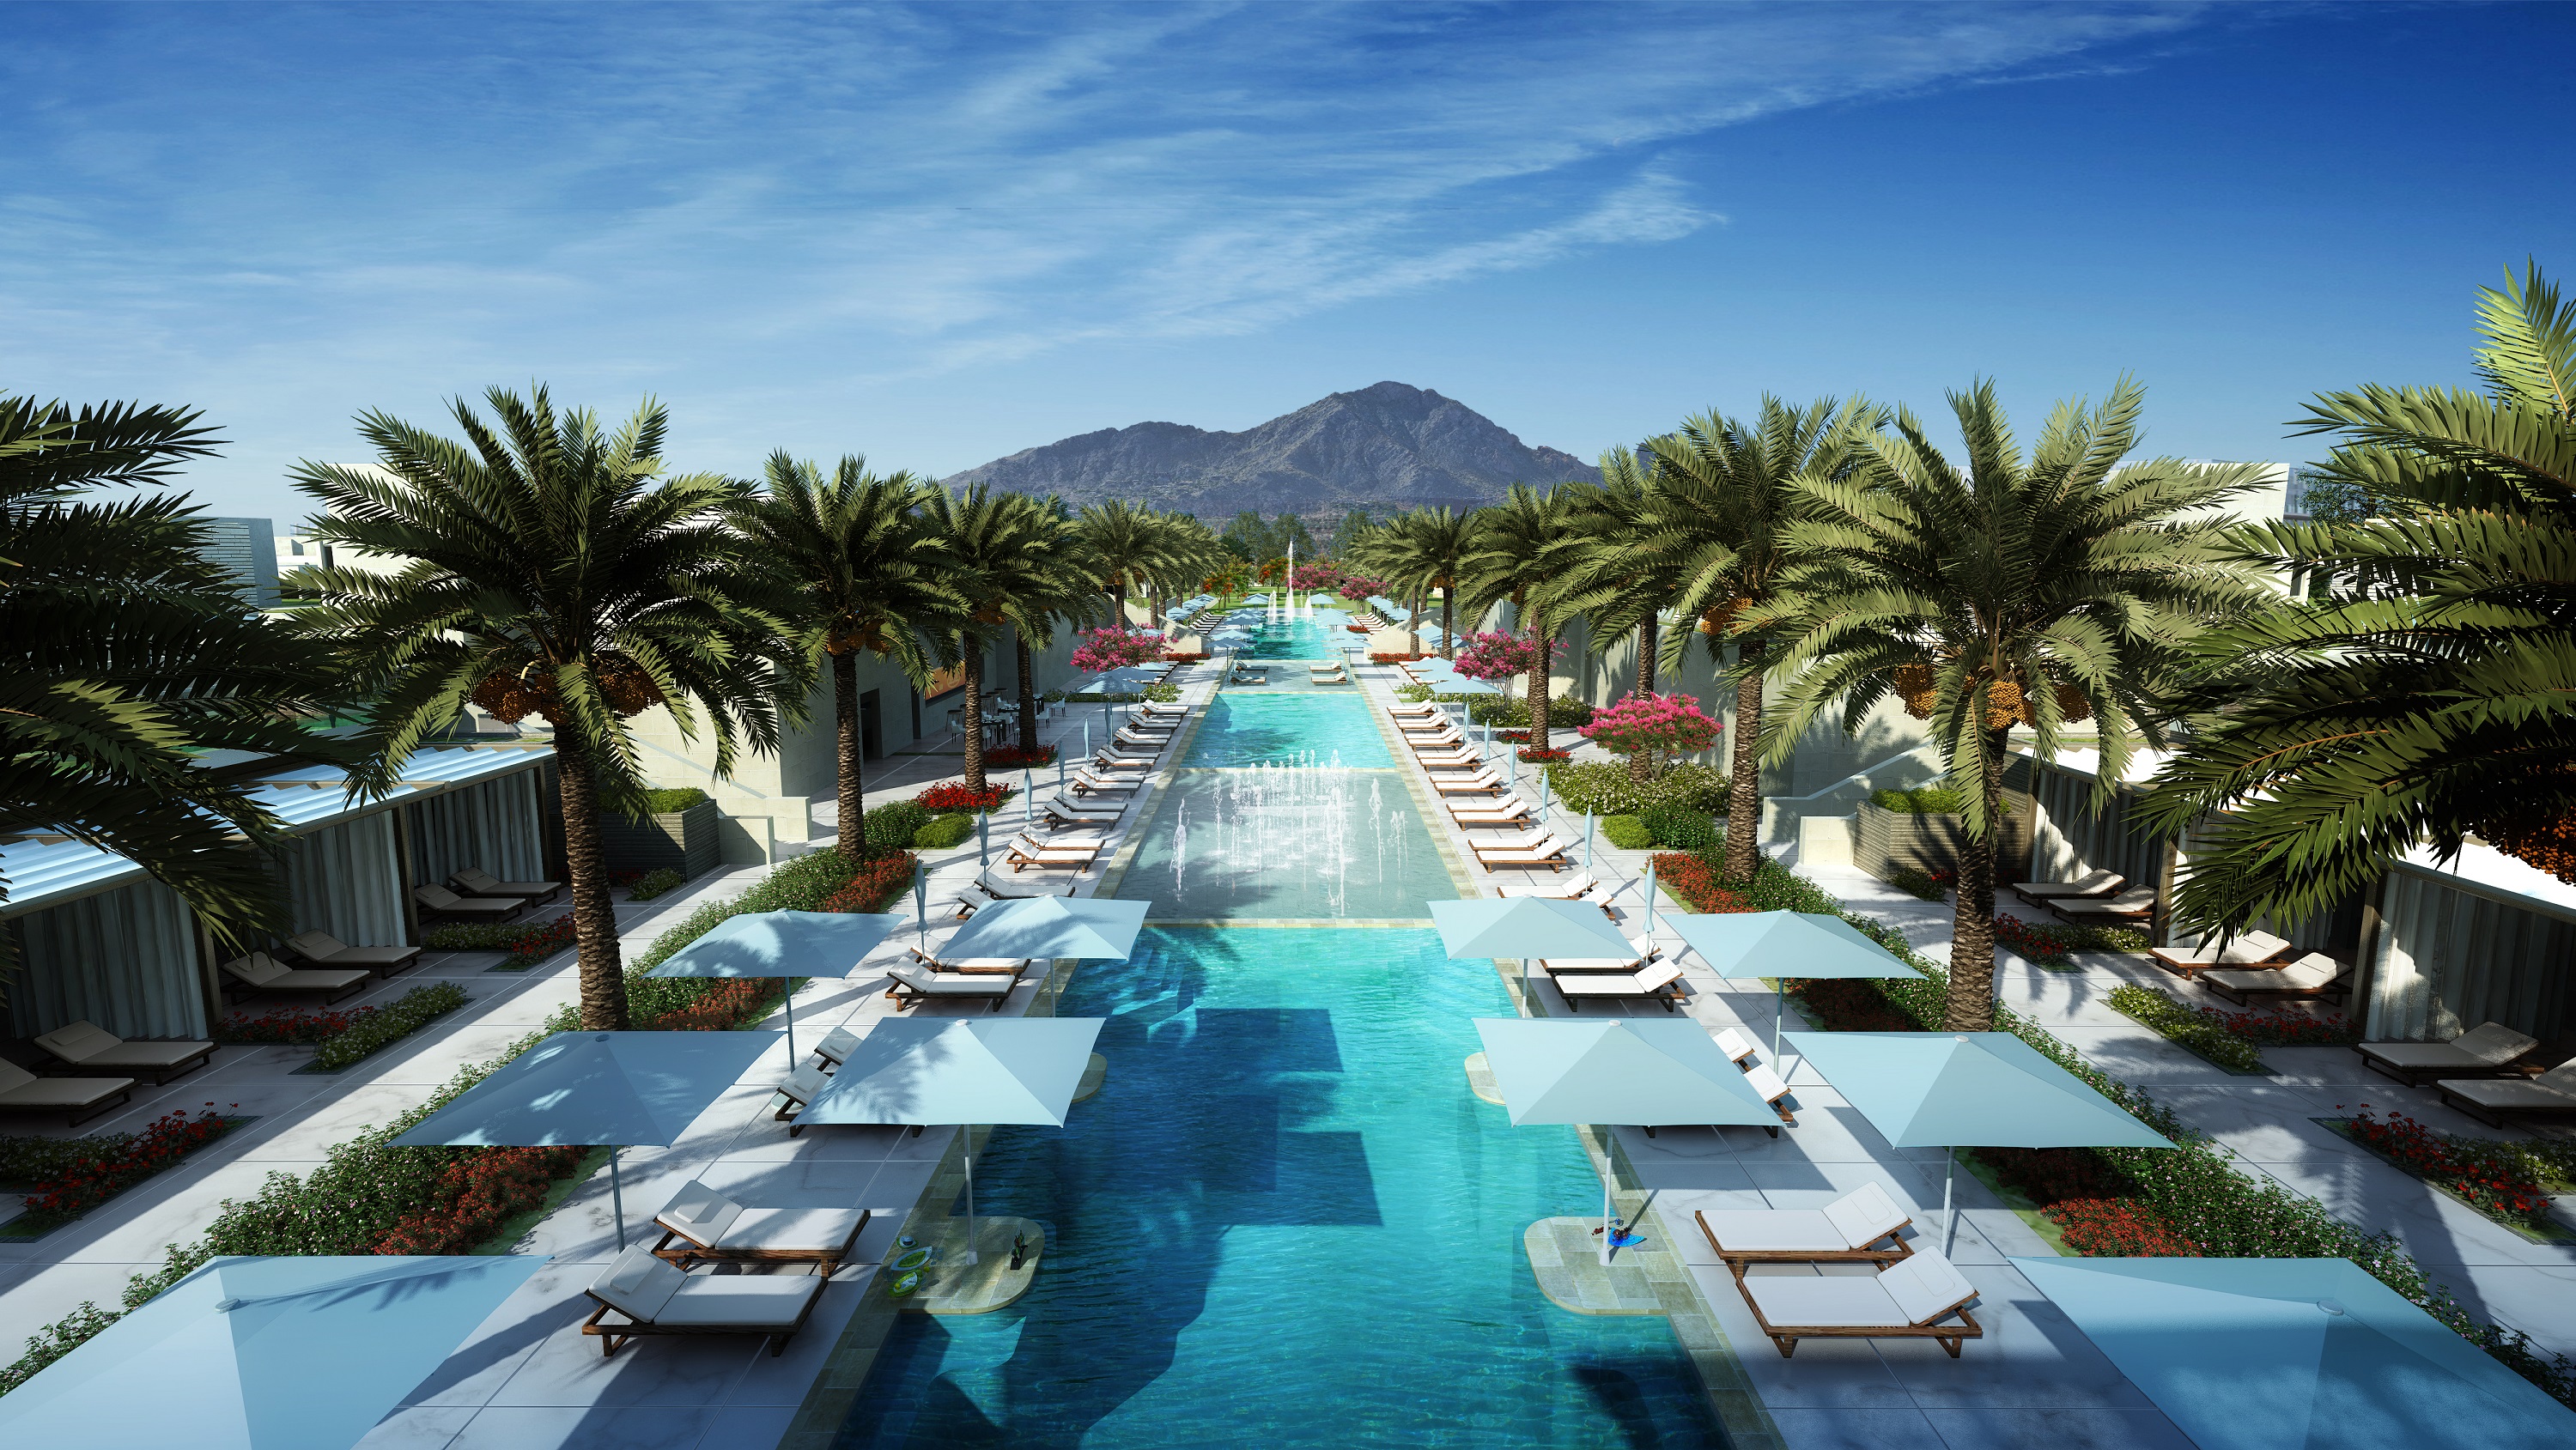 The new pool at the Ritz-Carlton Paradise Valley.